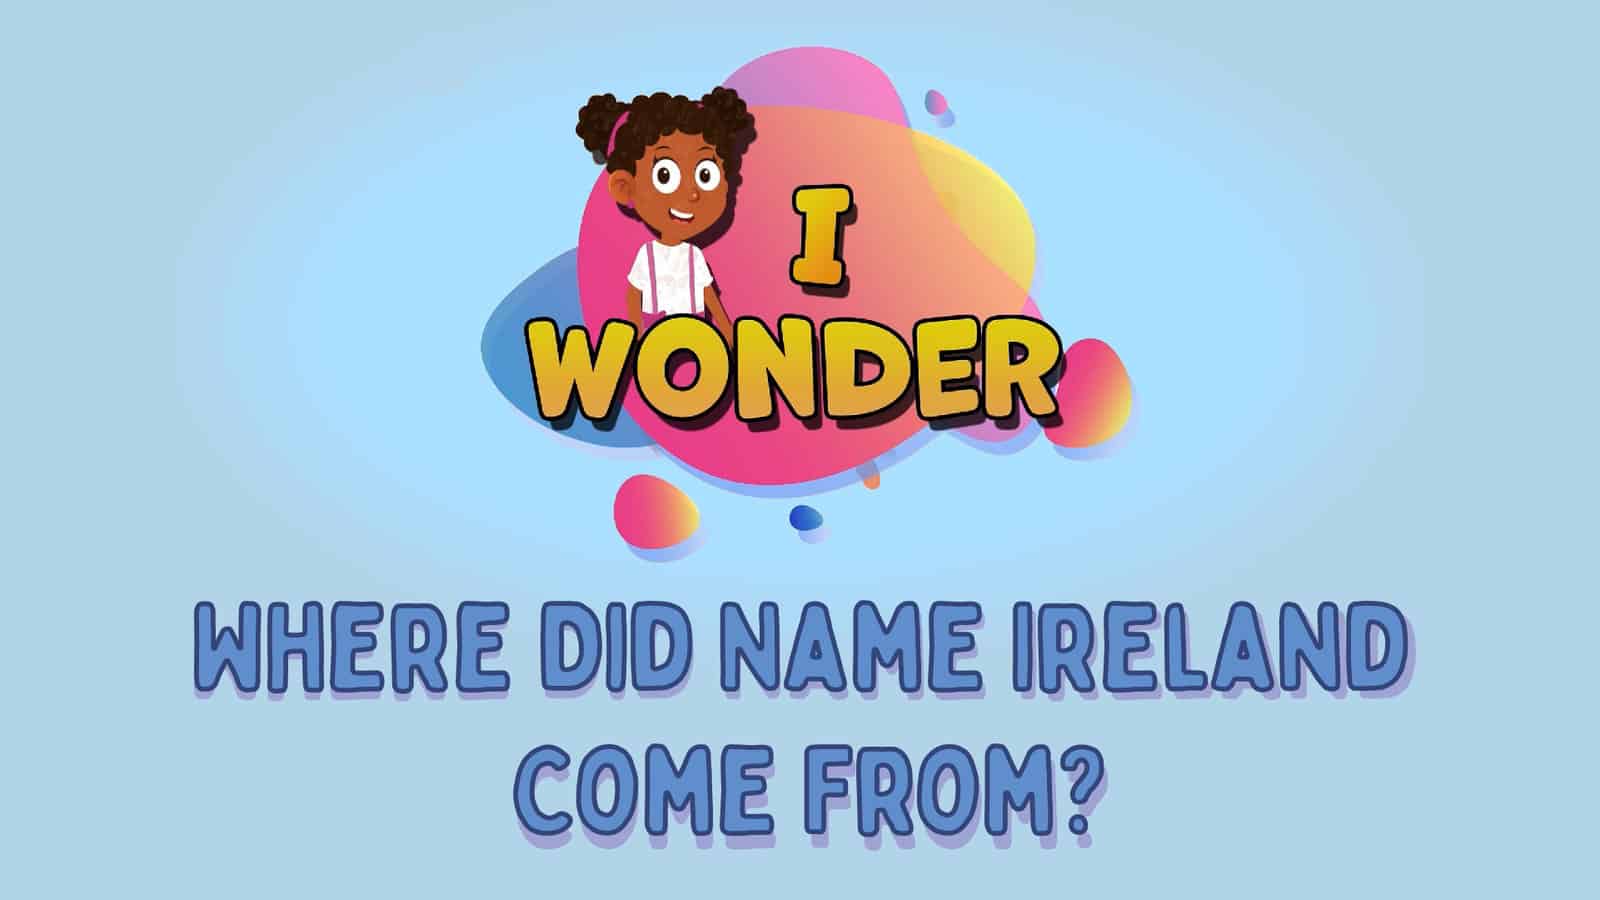 Where Did Name Ireland Come From?